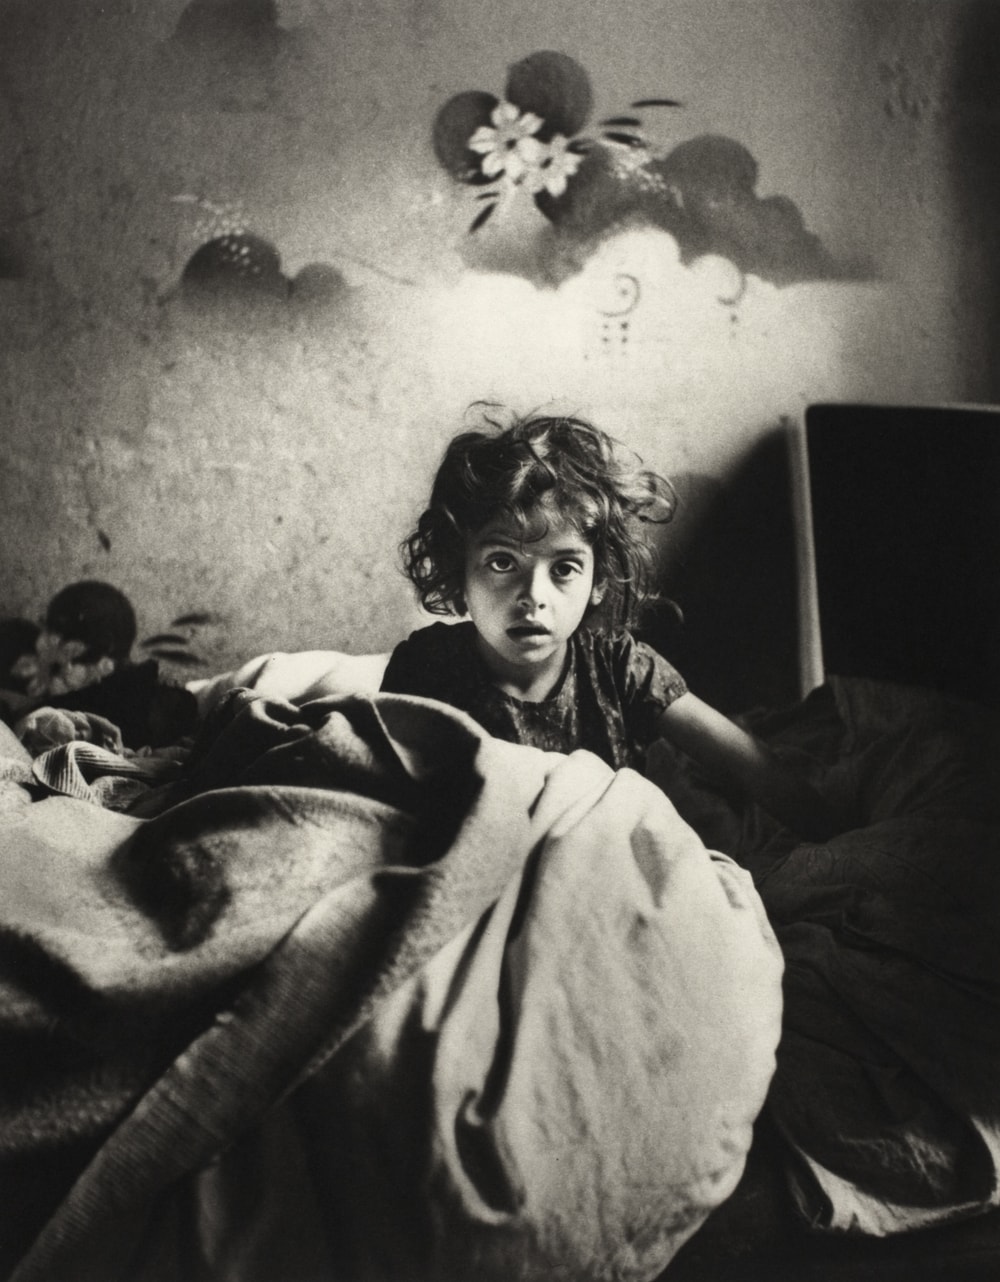 Roman Vishniac, 'Sara, sitting in bed in a basement dwelling, with stenciled flowers above her head, Warsaw', ca. 1935–37. © Mara Vishniac Kohn, courtesy International Center of Photography. On display at The Photographers’ Gallery